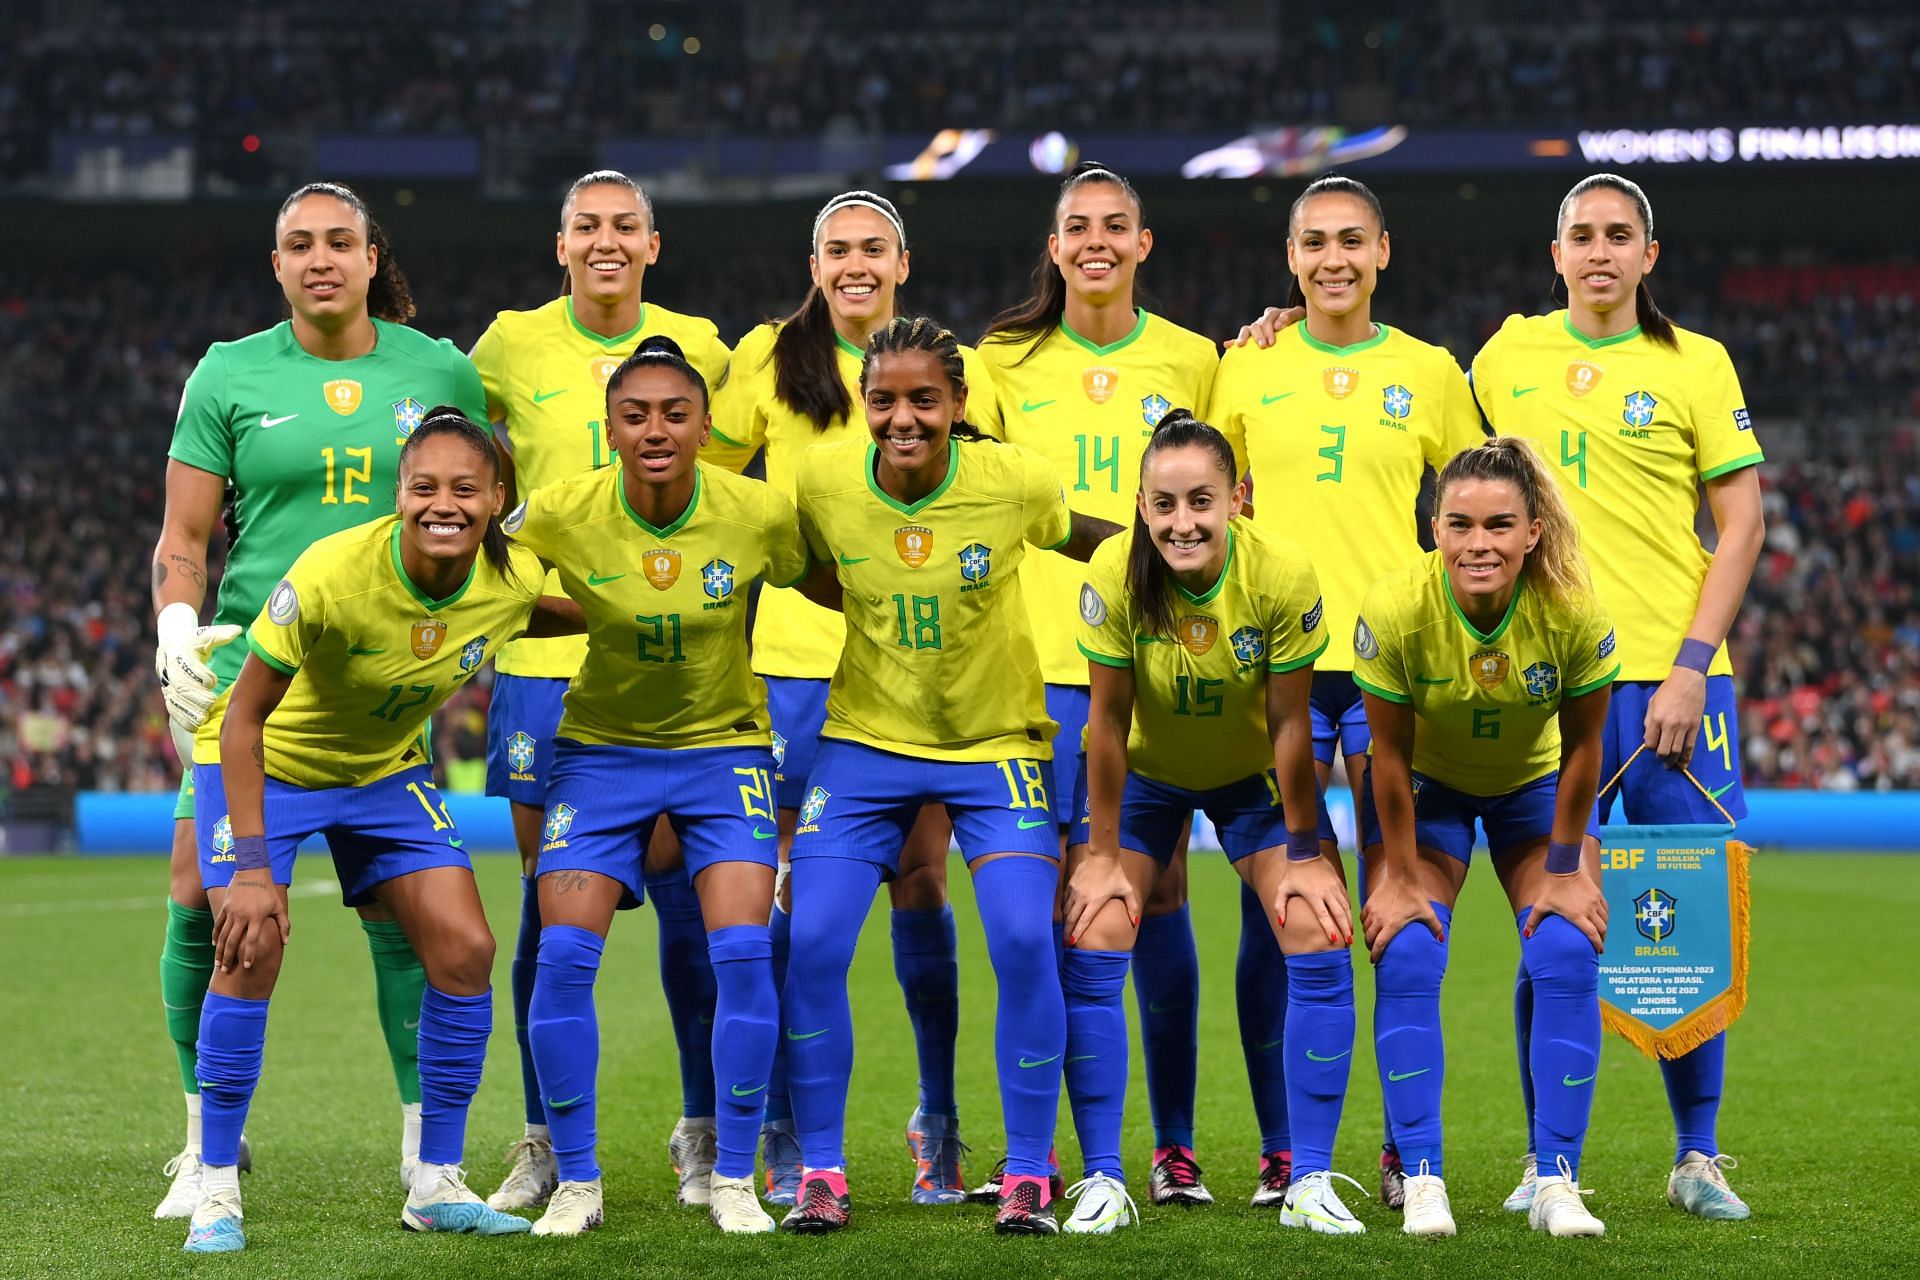 Odds to win Women's World Cup 2023 with ranking of teams most